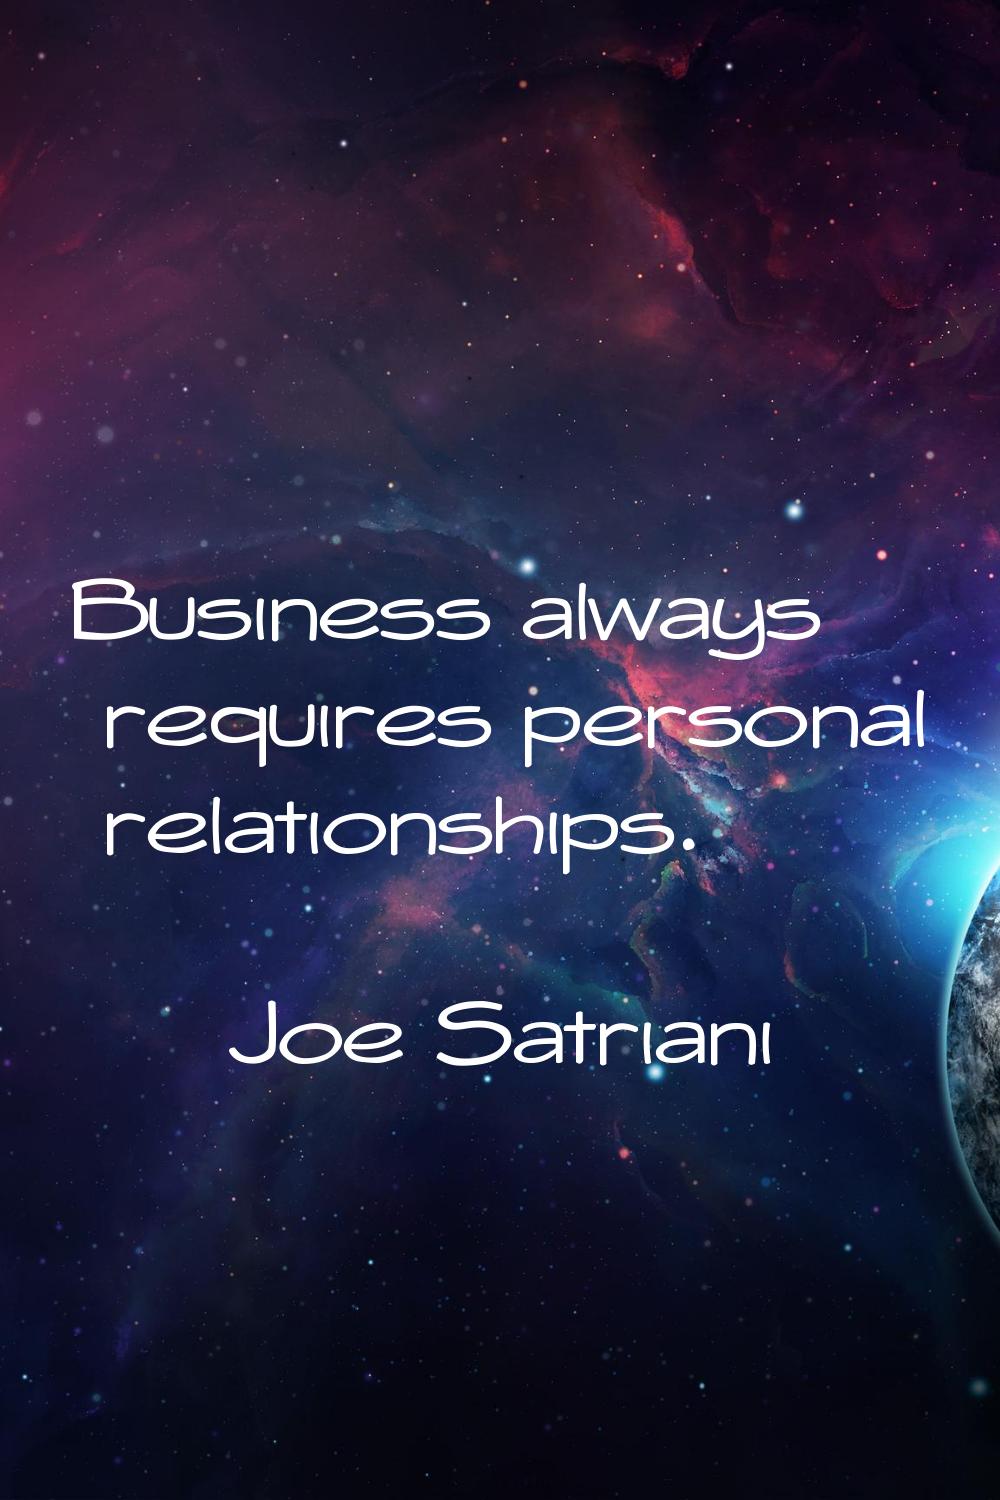 Business always requires personal relationships.